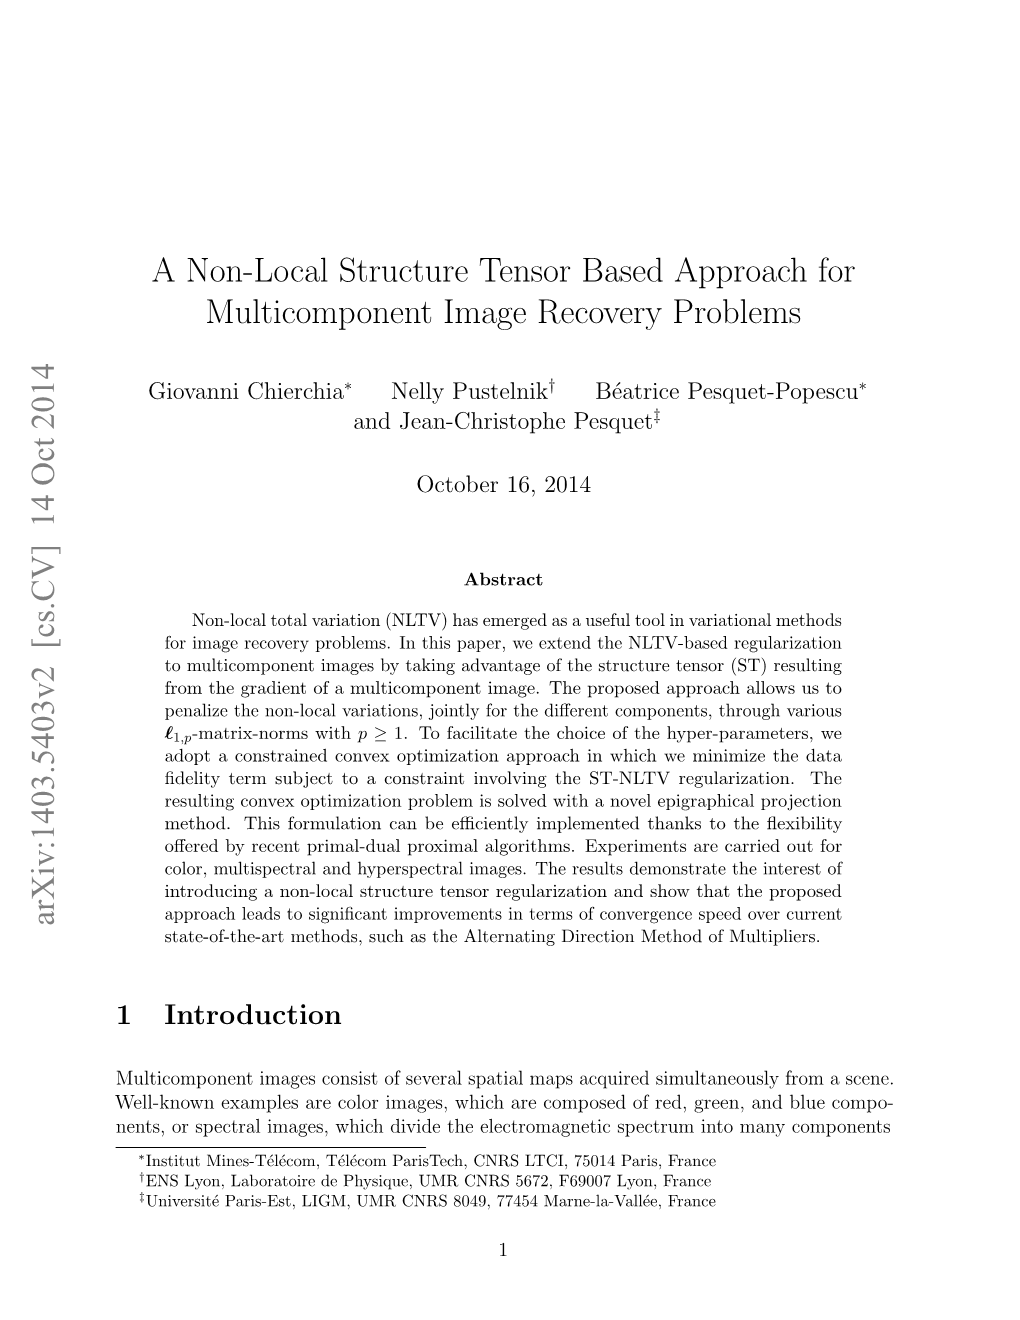 A Non-Local Structure Tensor Based Approach for Multicomponent Image Recovery Problems